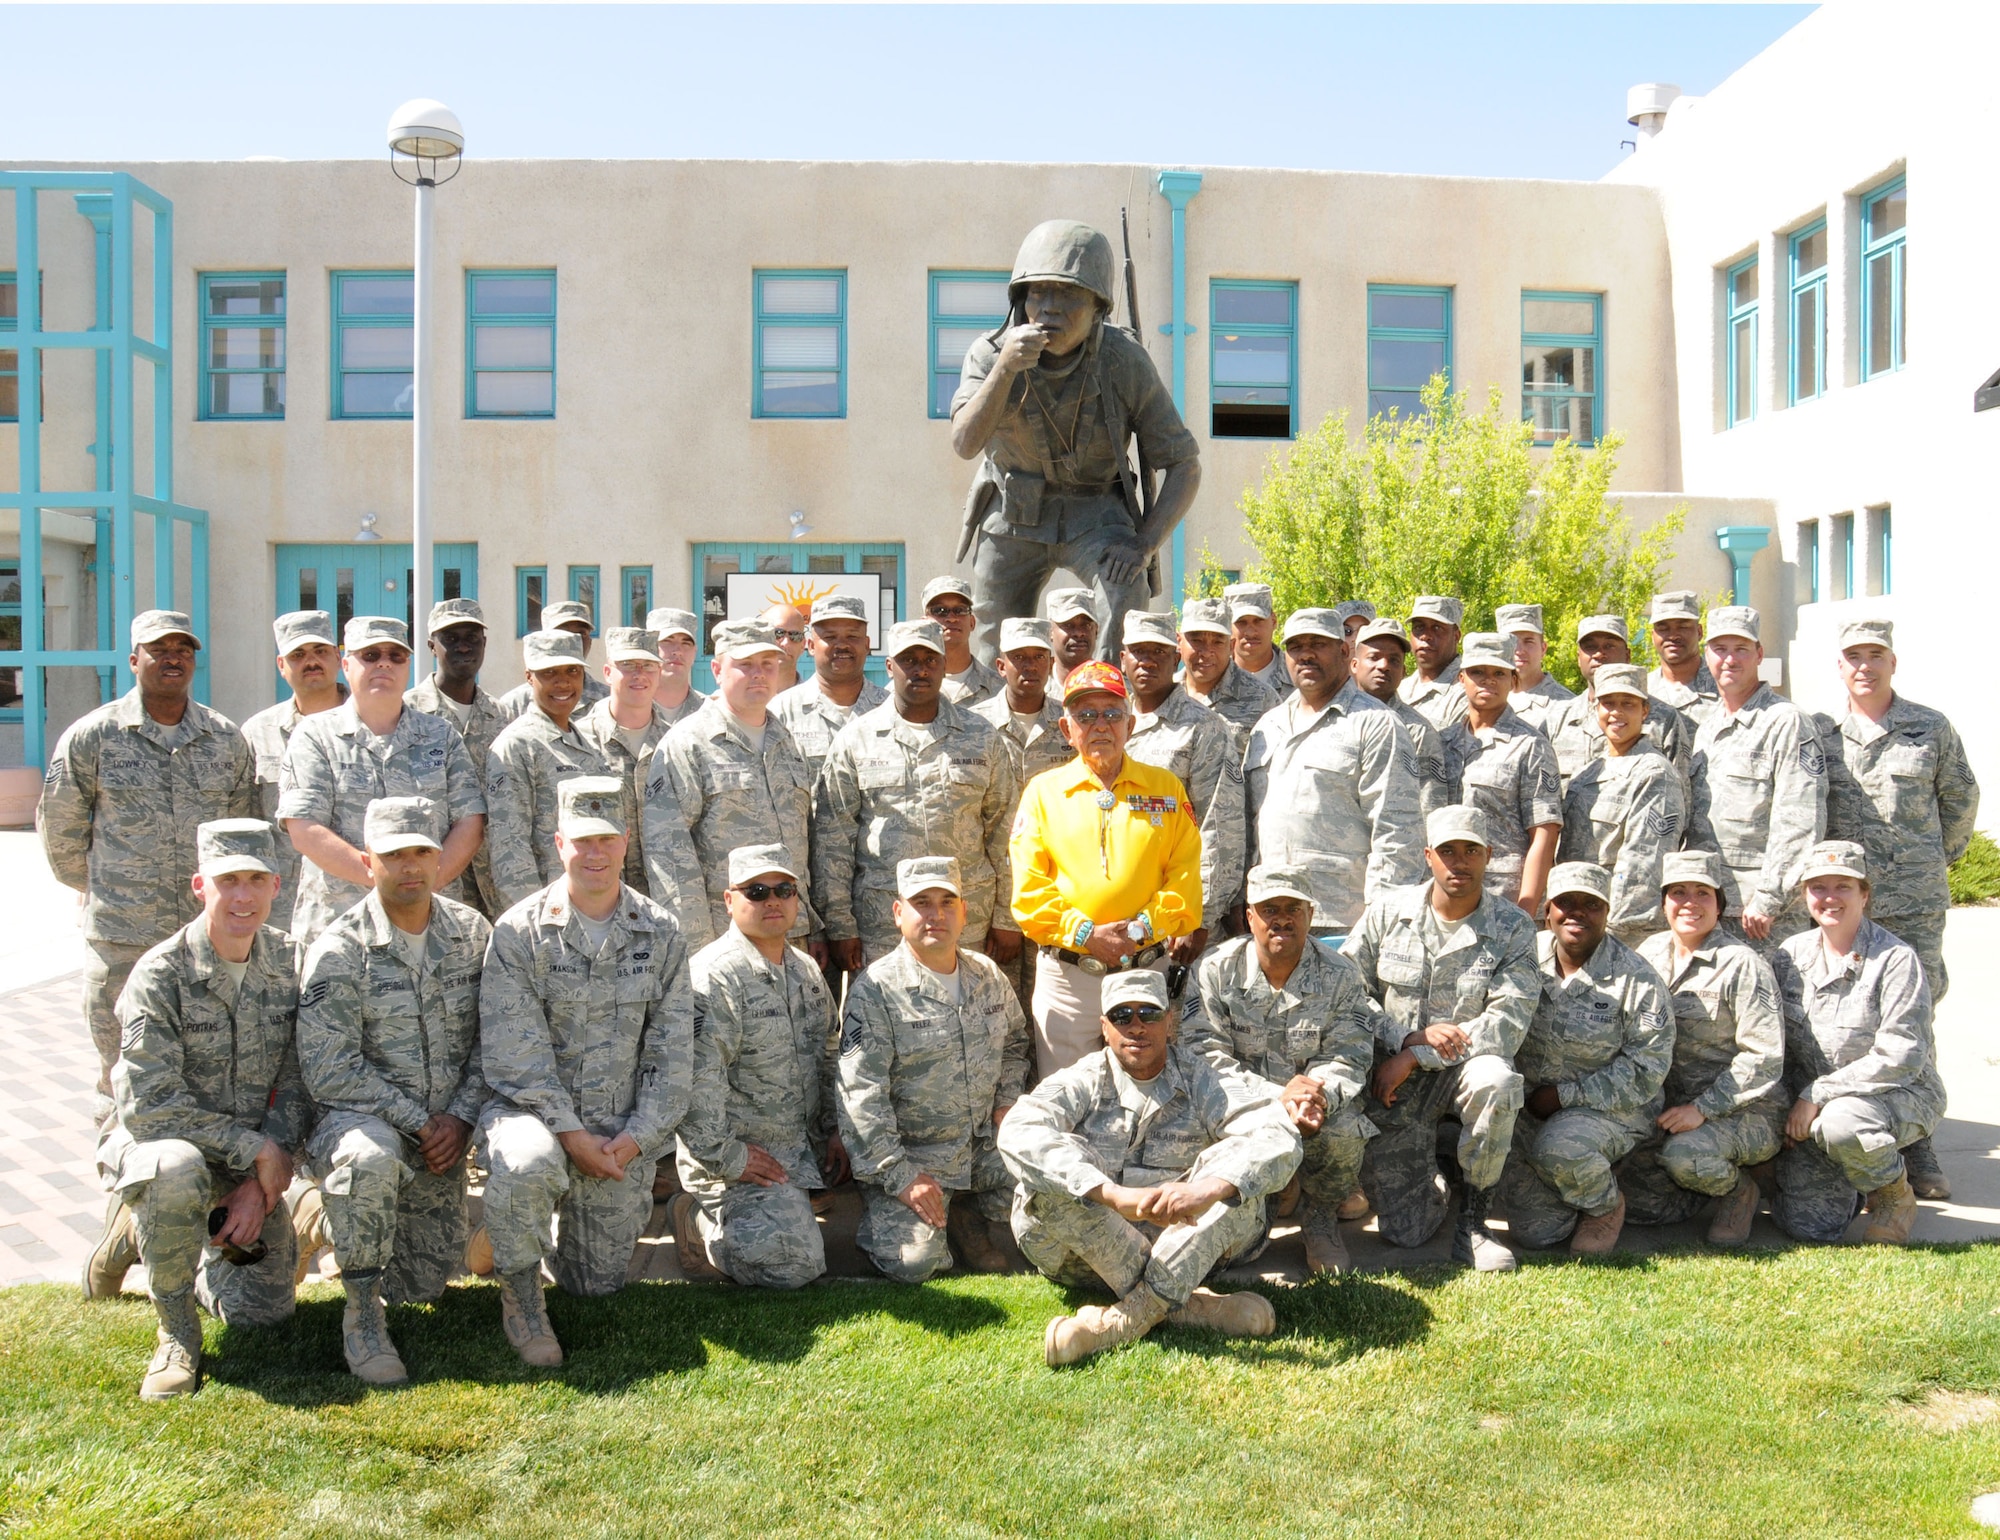 Members of the 113th Civil Engineer Squadron (113th CES), District of Columbia Air National Guard, pose with Bill Toledo, an original Navajo "Code-Talker" from World War II, following a speech by Toledo in which Toledo relayed his experiences during the war.  The 113th CES members are in Window Rock, Ariz., as part of the Innovative Readiness Training, a civil-military affairs program linking military units with civilian communities for humanitarian projects.  (U.S. Air Force Photo by Tech Sgt. Craig Clapper)   